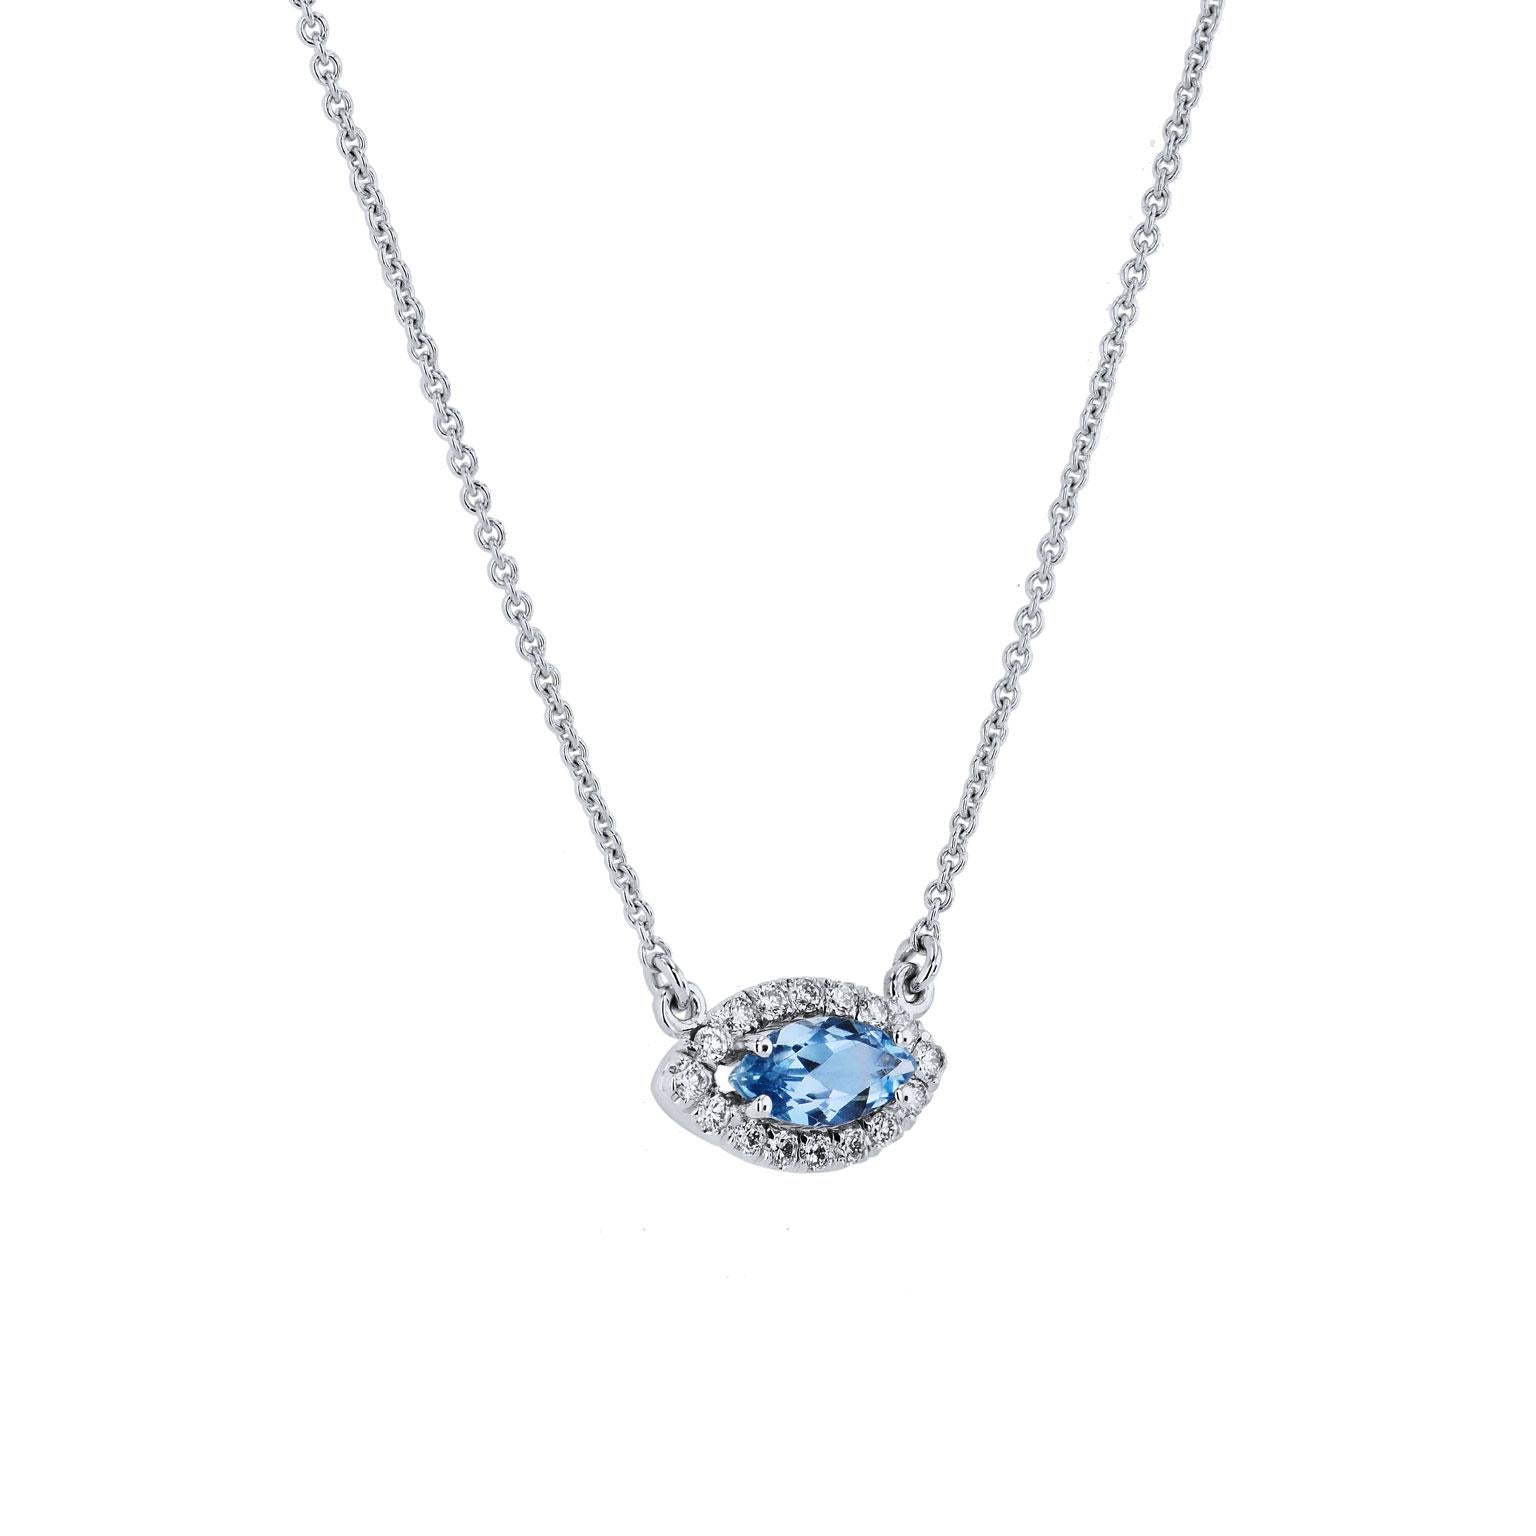 One of a kind, handmade .45 Marquise Cut Aquamarine and Diamond Halo Pendant

This is an eye catching 0.45 carat marquise cut aquamarine pendant, centered in a halo of 0.14 carats in total weight of pave set diamonds (G-H/VS) handmade by H&H Jewels